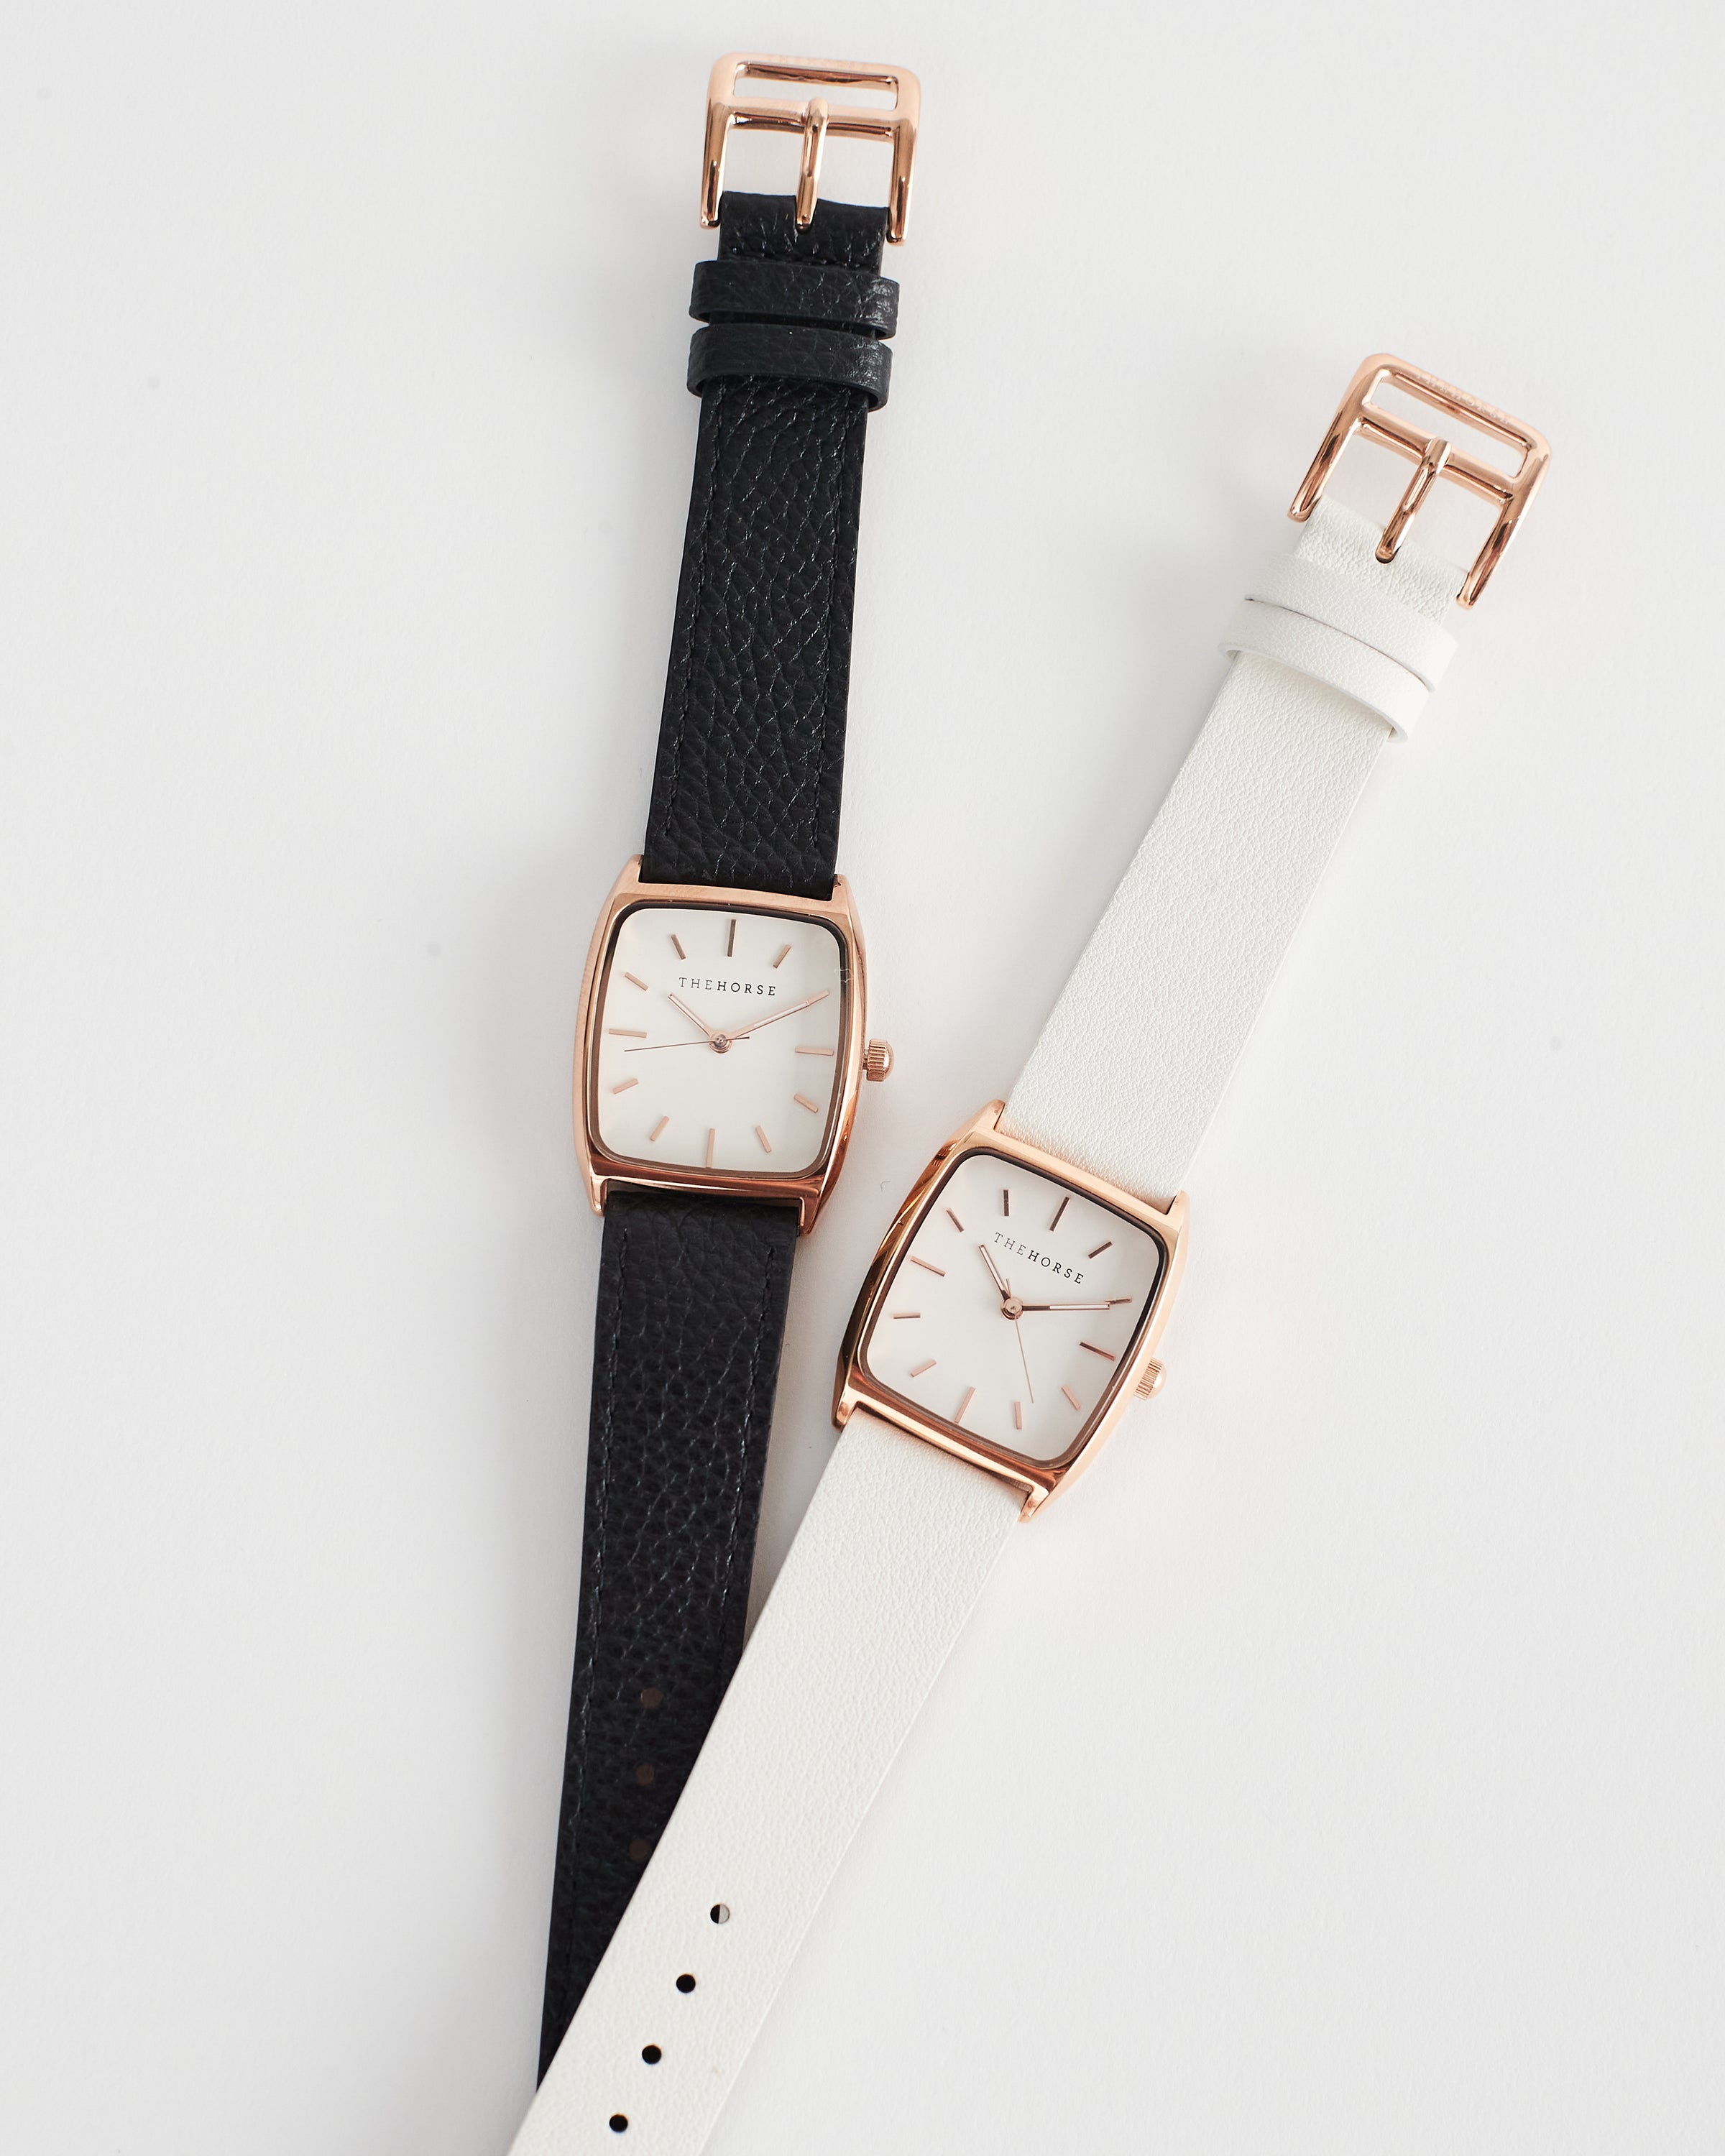 The Dress Watch: Rose Gold Case / White Dial / Milk Leather